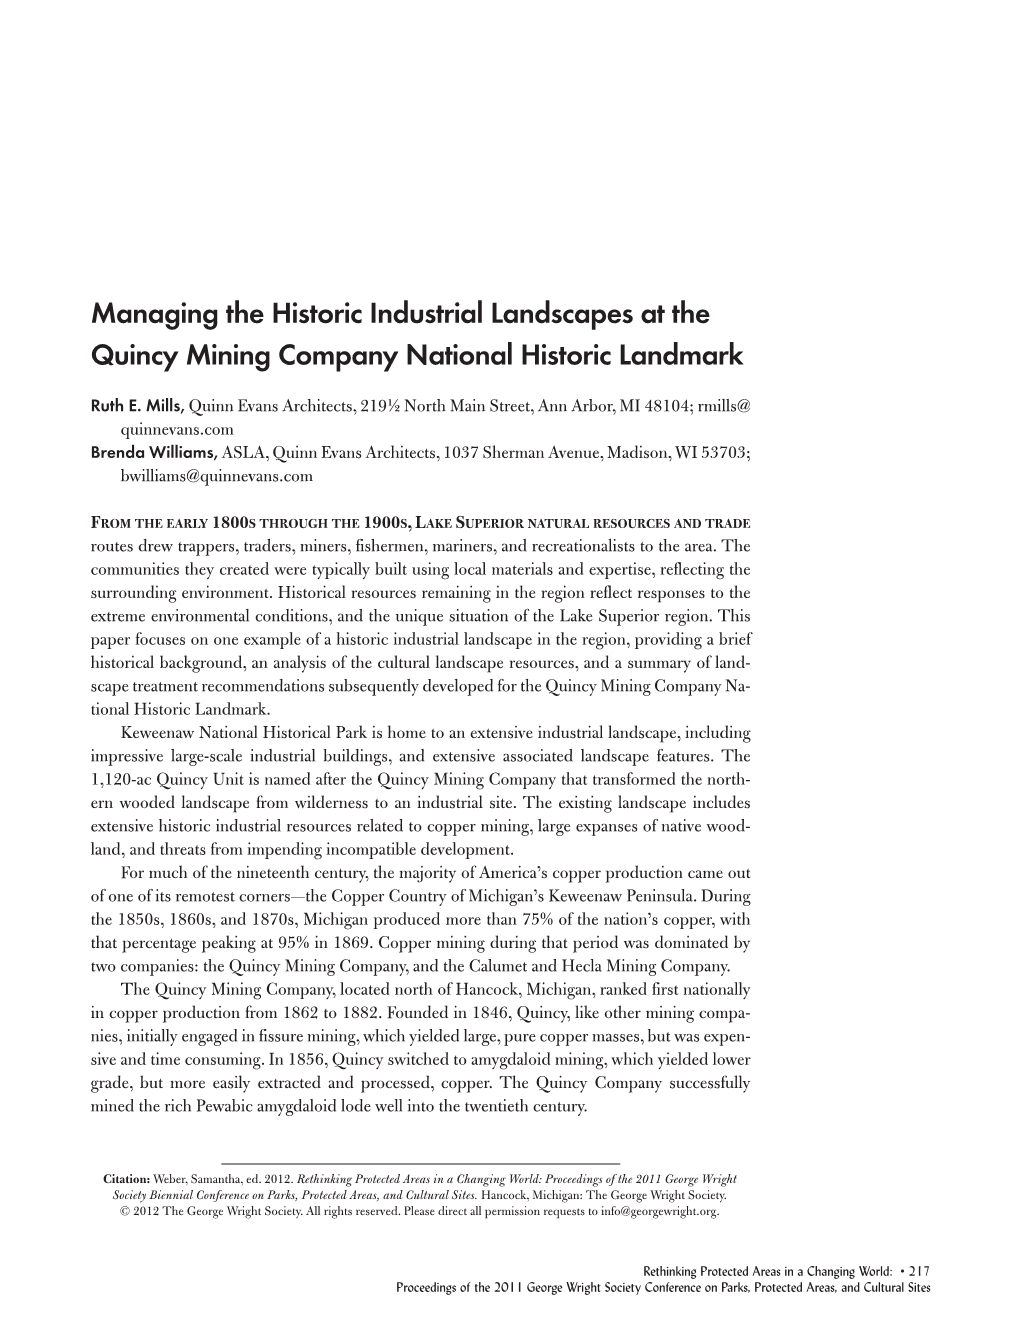 Managing the Historic Industrial Landscapes at the Quincy Mining Company National Historic Landmark